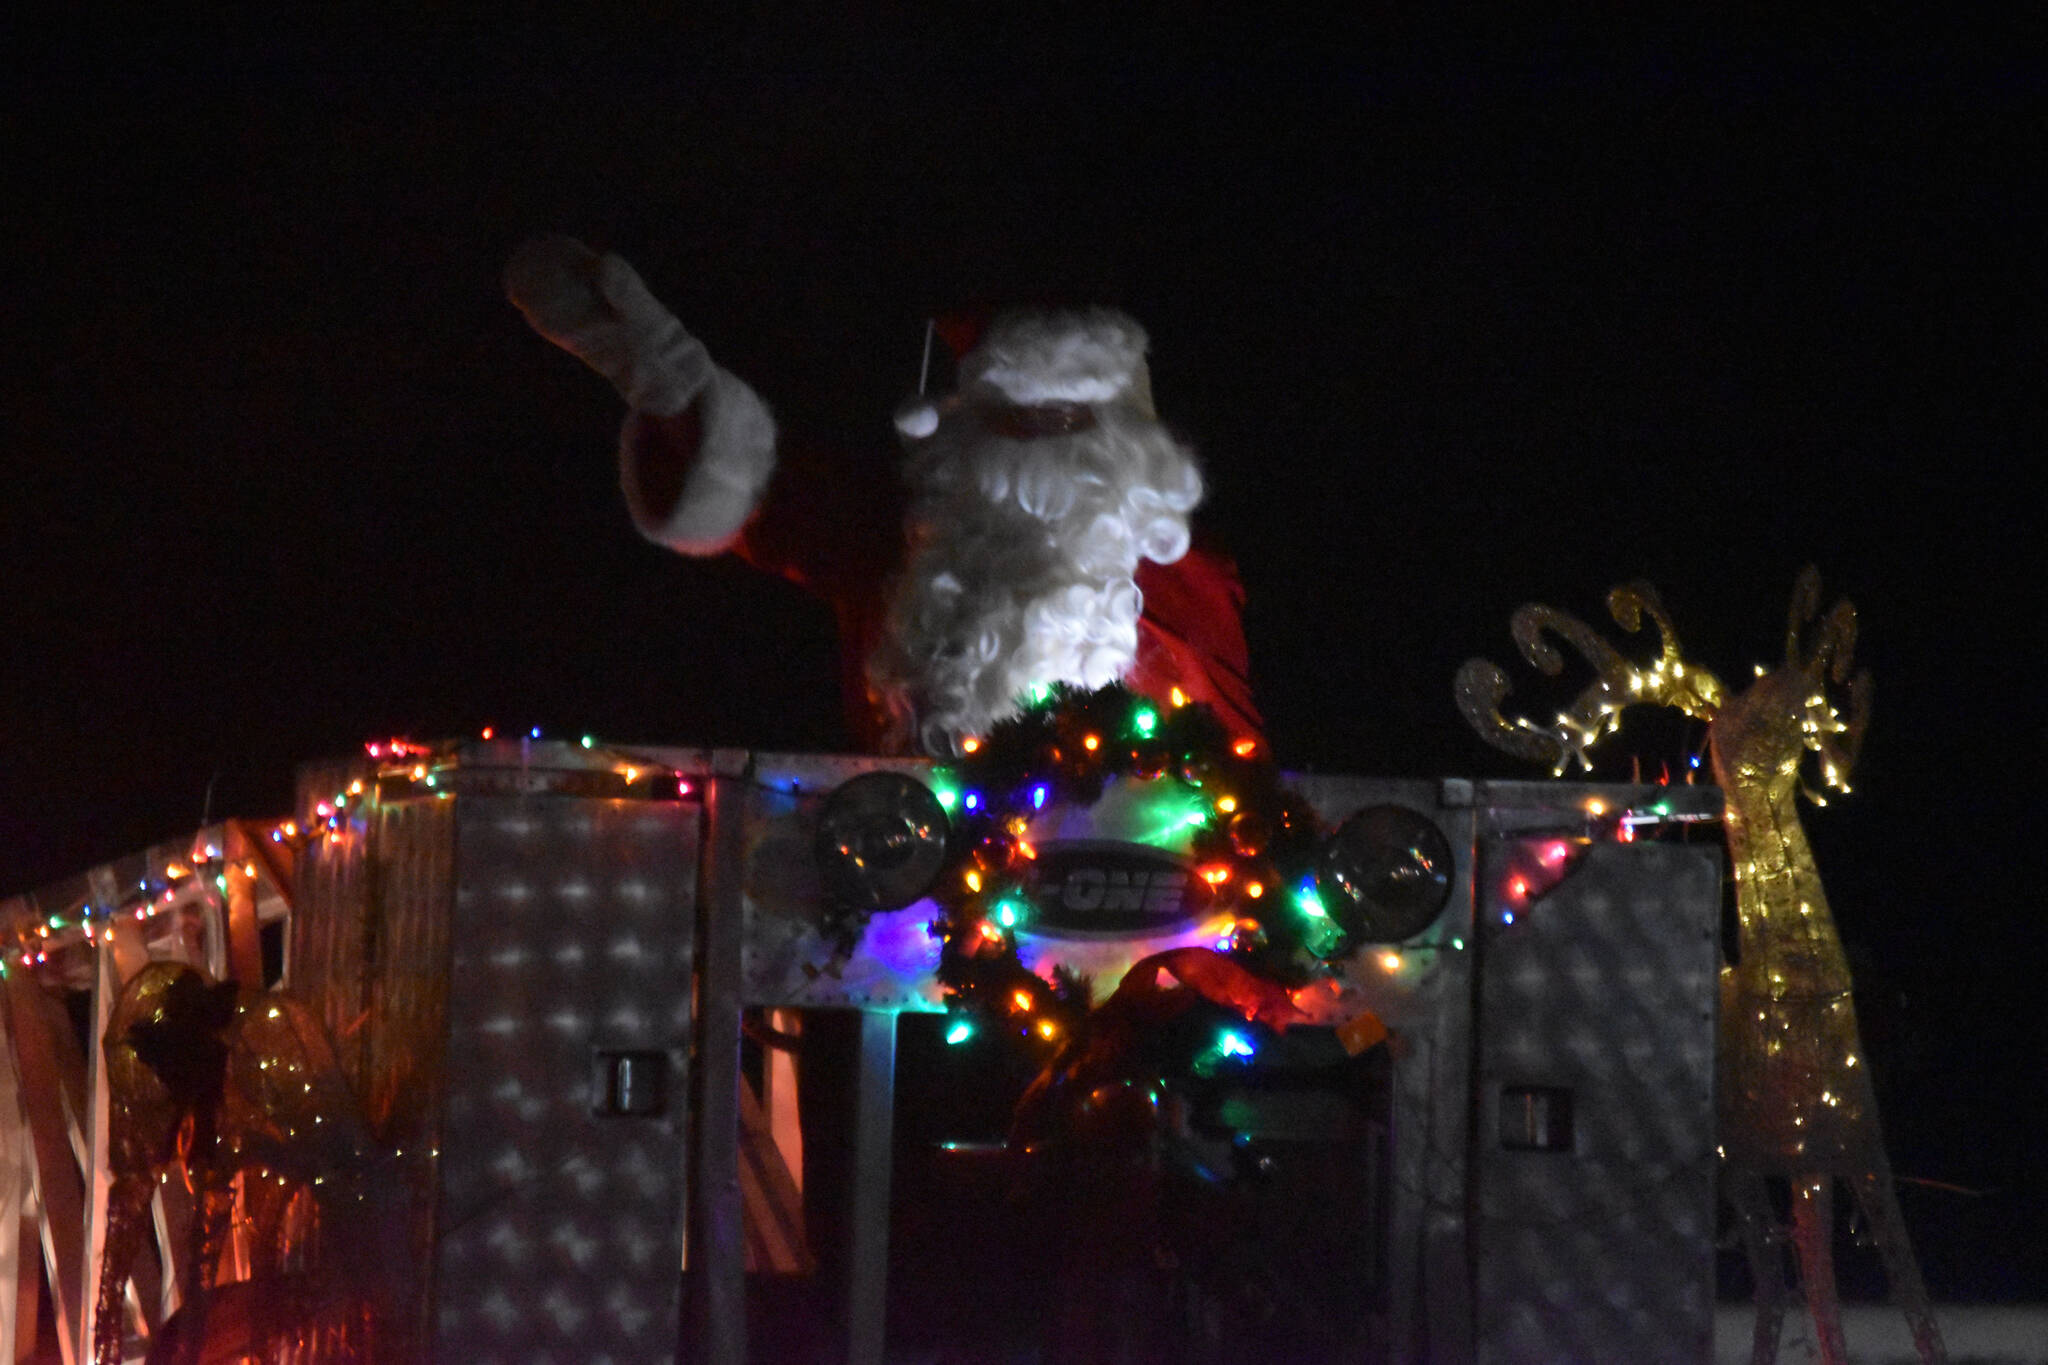 Santa Claus waves to the crowd during the Electric Light Parade, part of Christmas Comes to Kenai festivities at the Kenai Chamber of Commerce and Visitor Center in Kenai, Alaska, on Friday, Nov. 25, 2022. (Jake Dye/Peninsula Clarion)